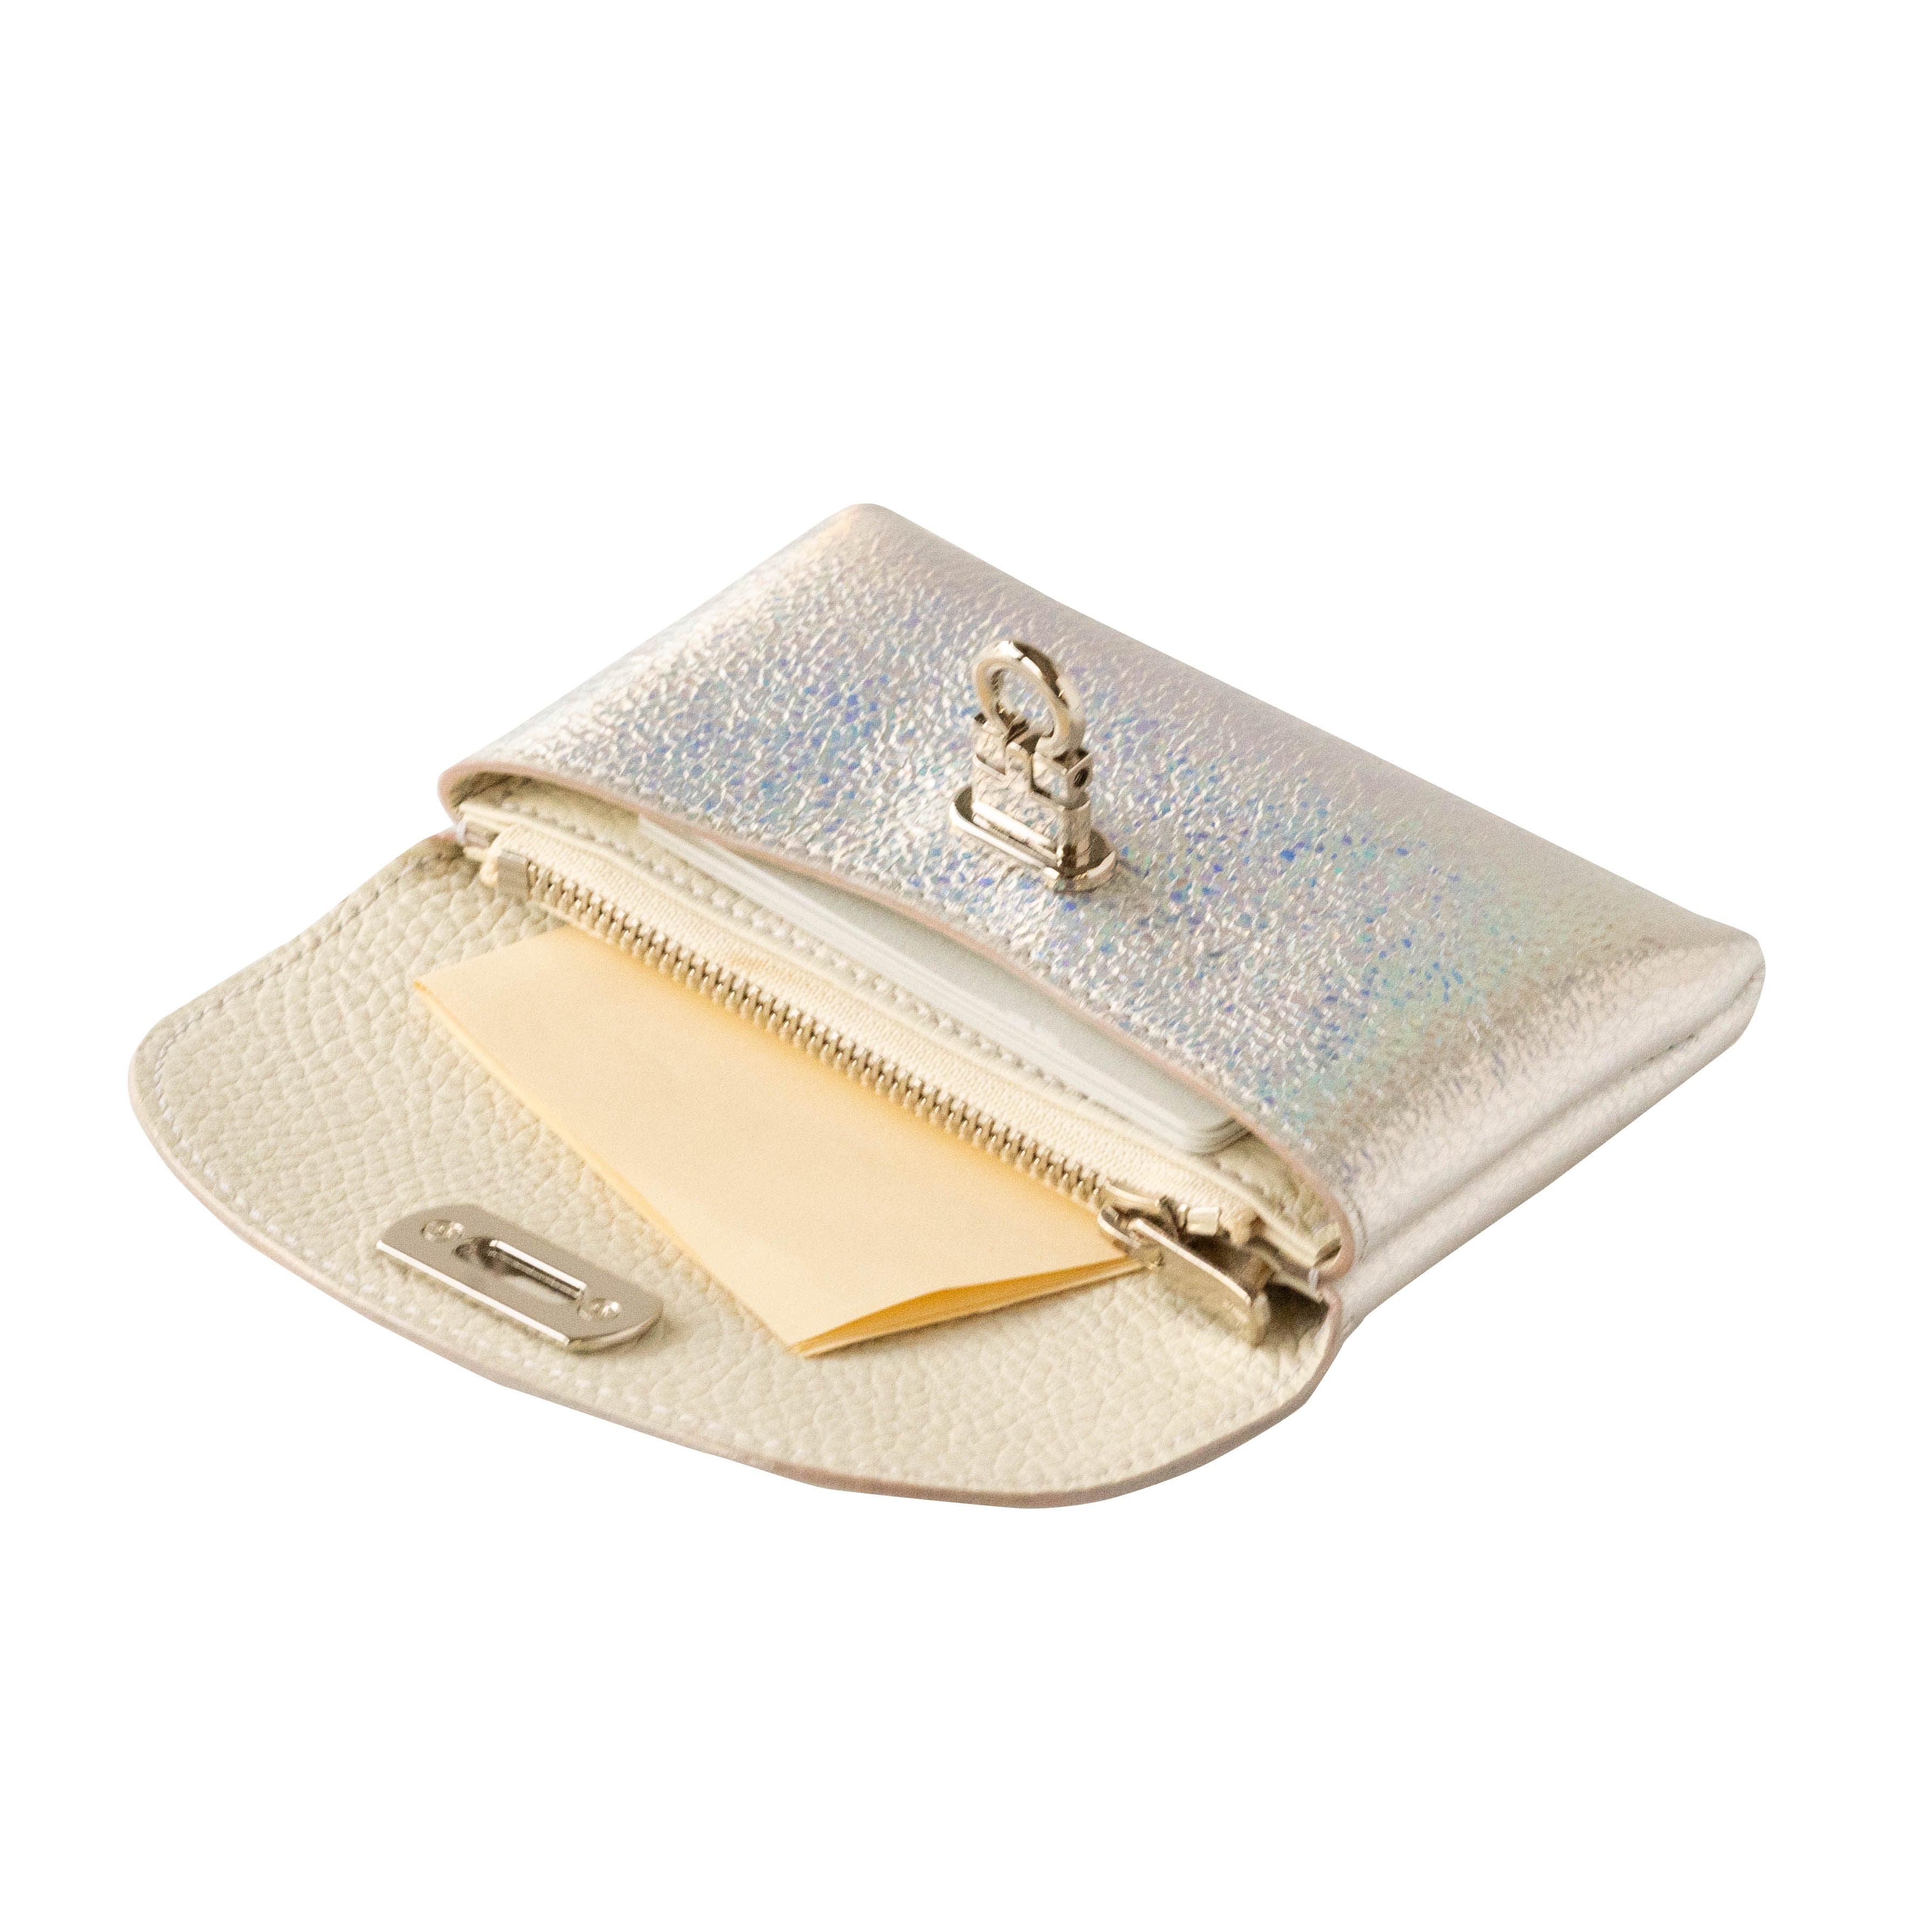 Leather flap middle wallet / Prism leather